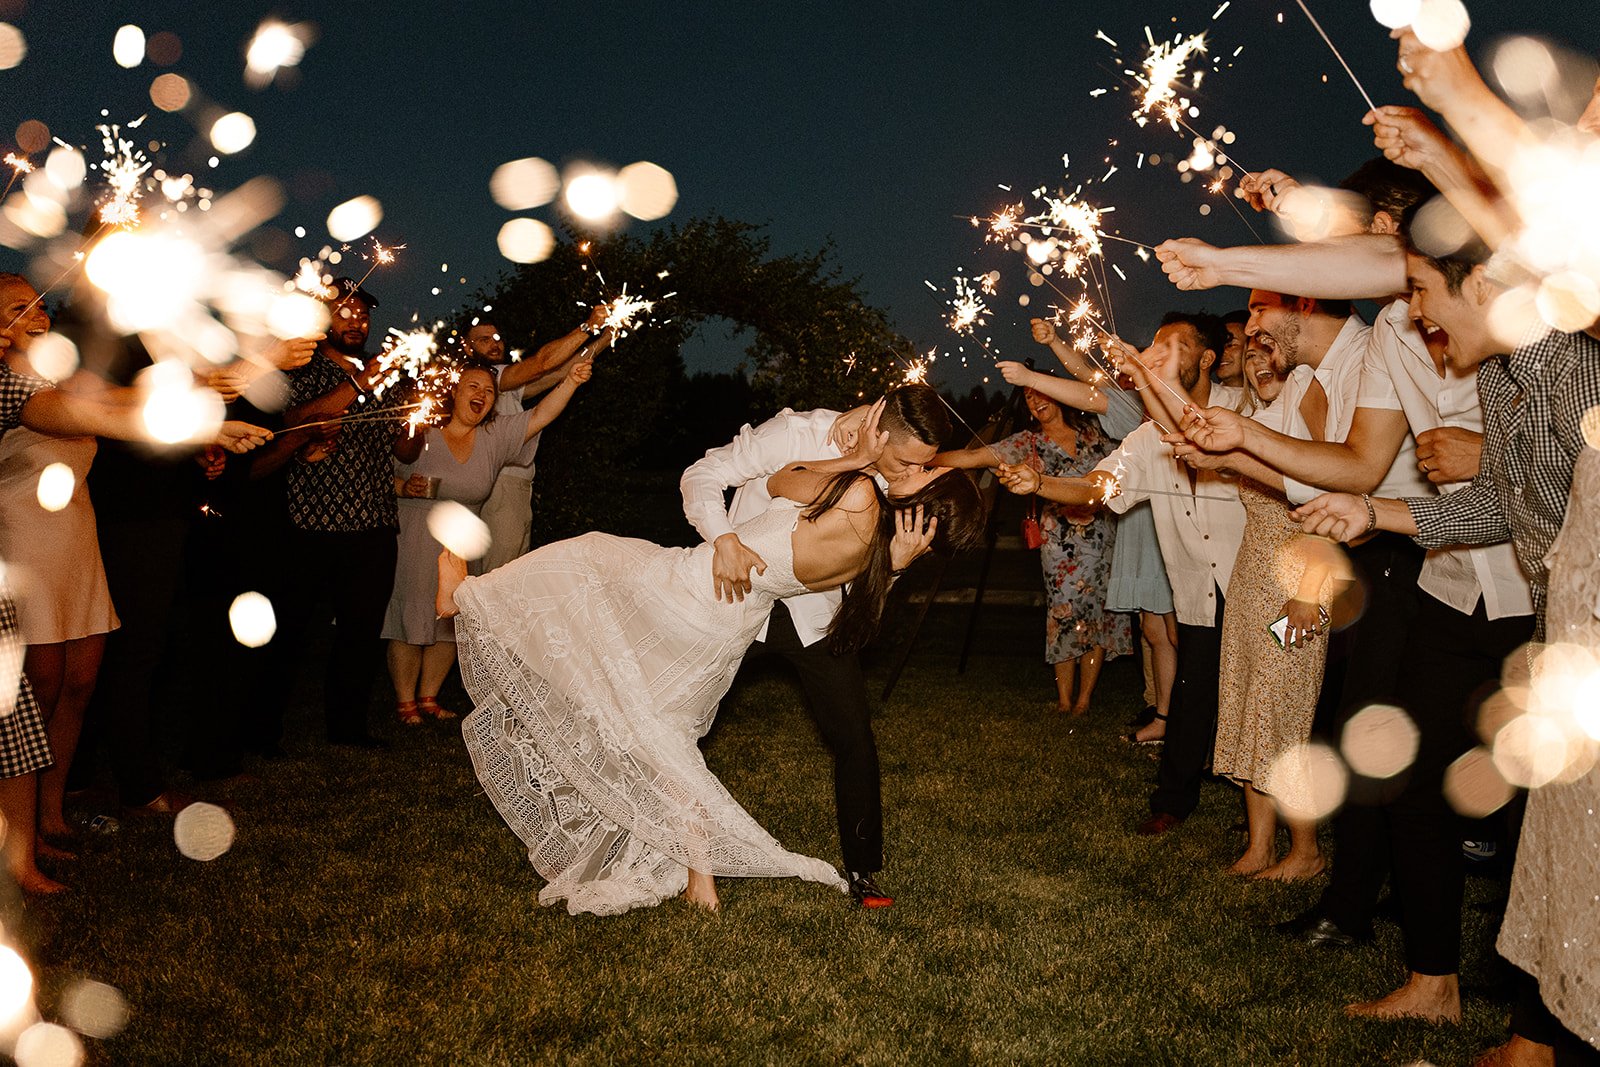 groom dipping the bride during their sparkler exit at the end of the night